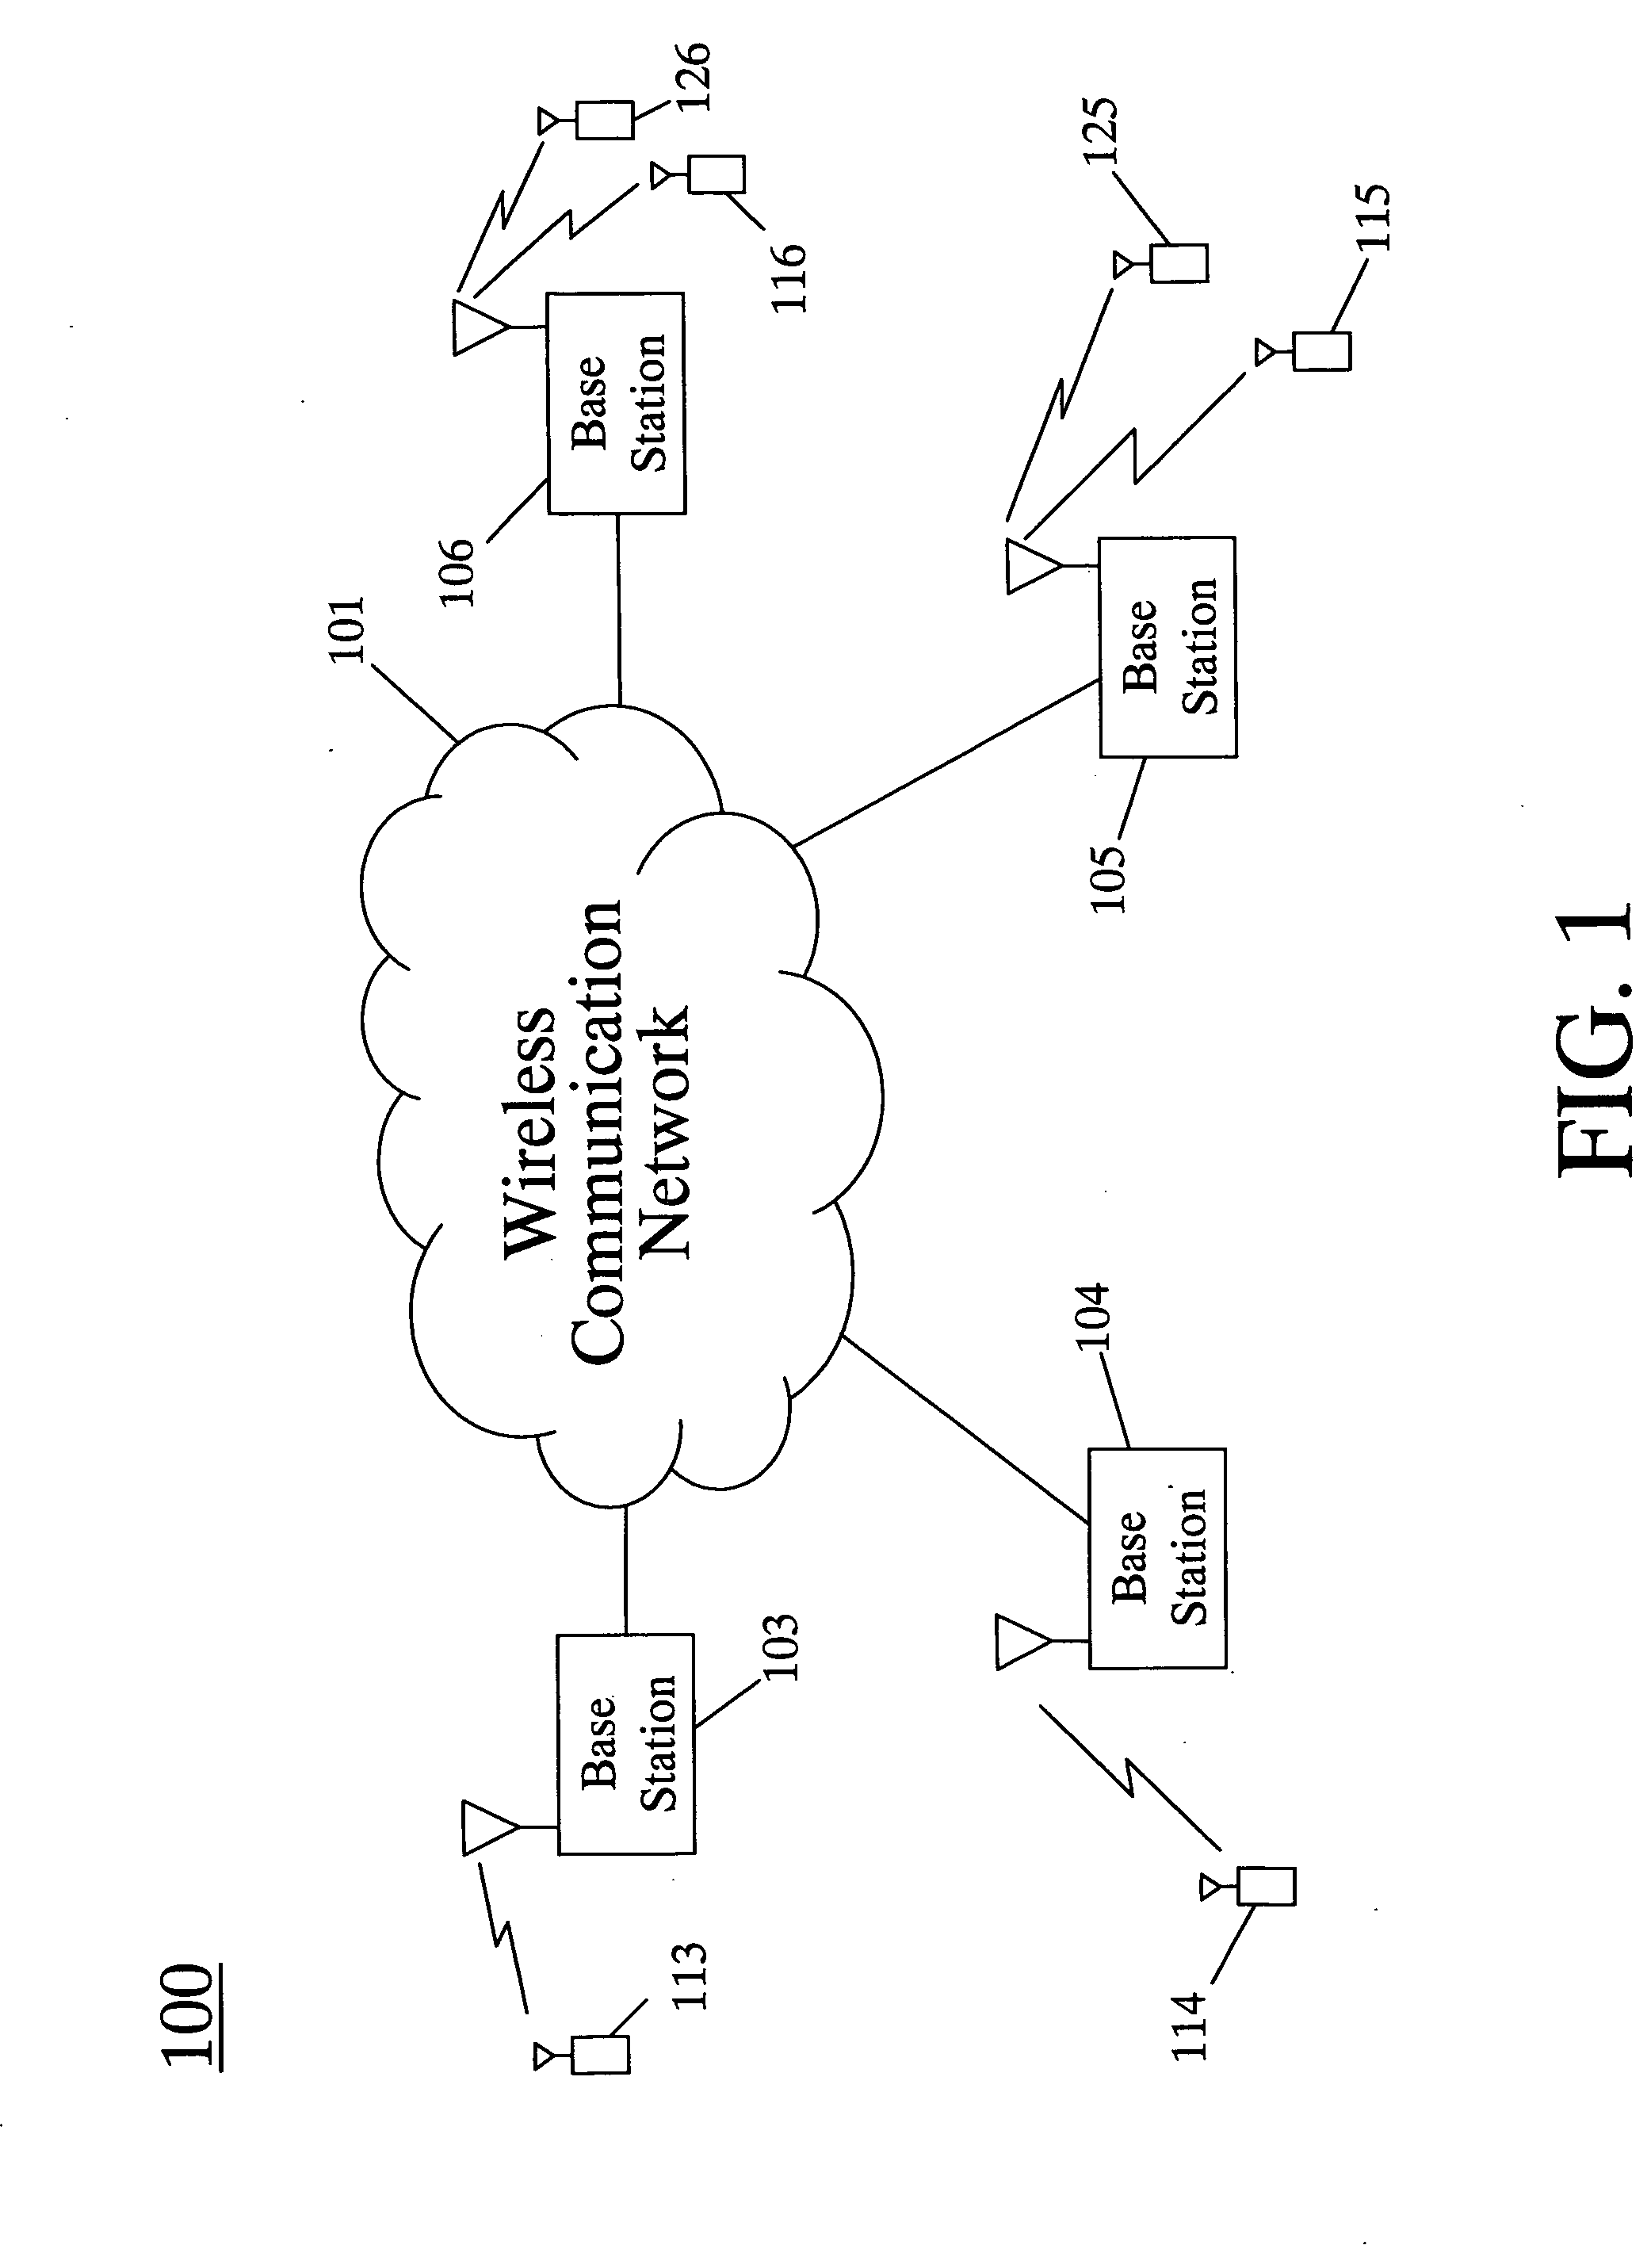 Method for alerting wireless units of an impending emergency situation